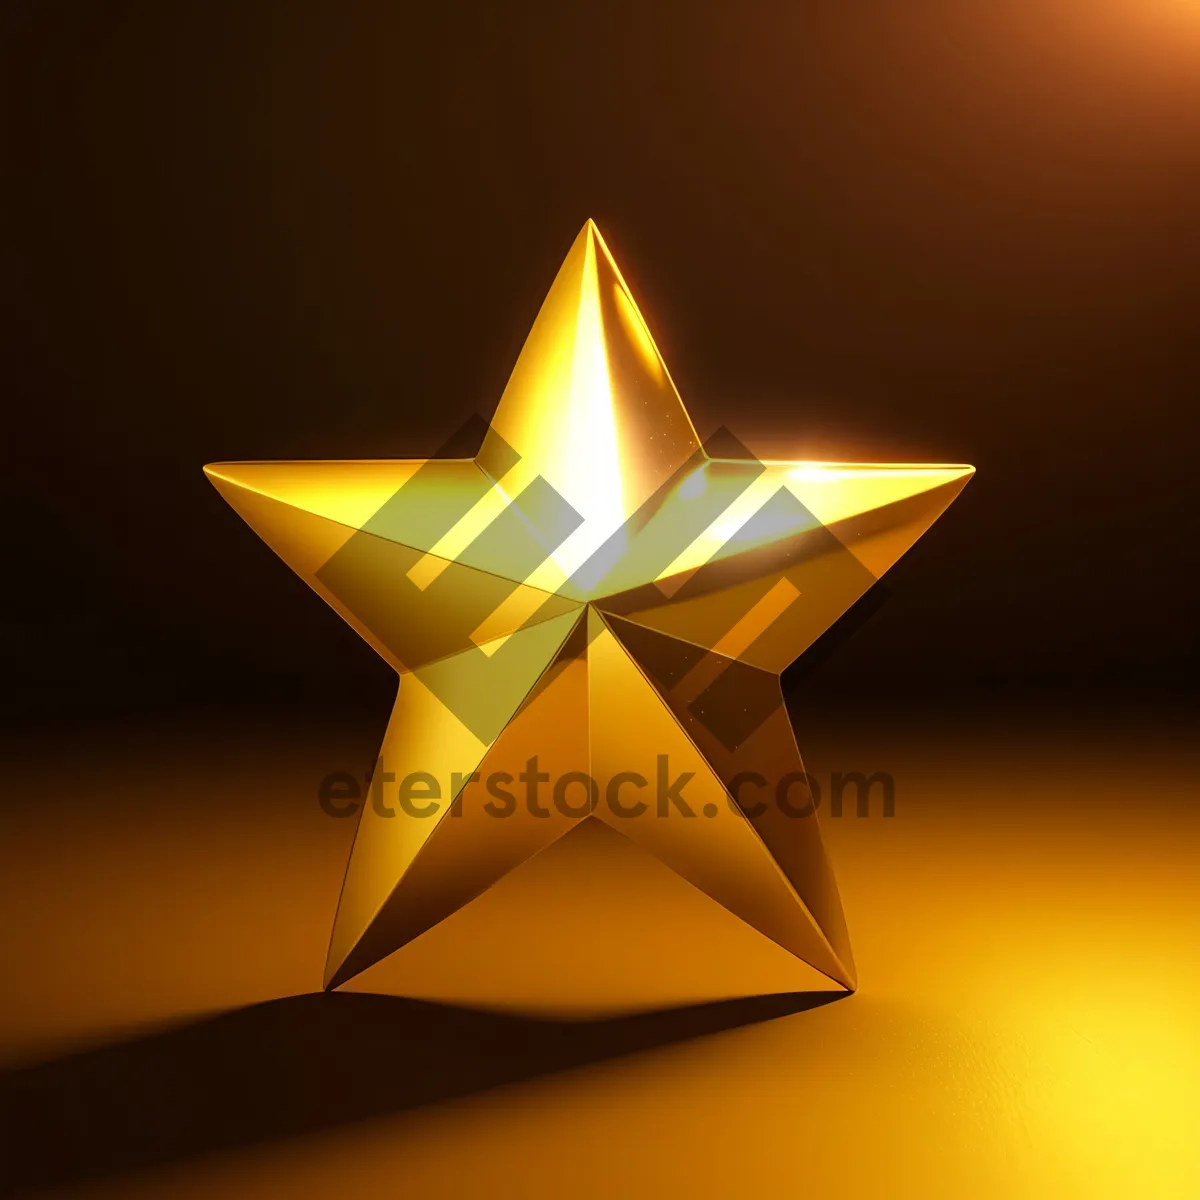 Picture of Shining Star Pyramid Design Icon